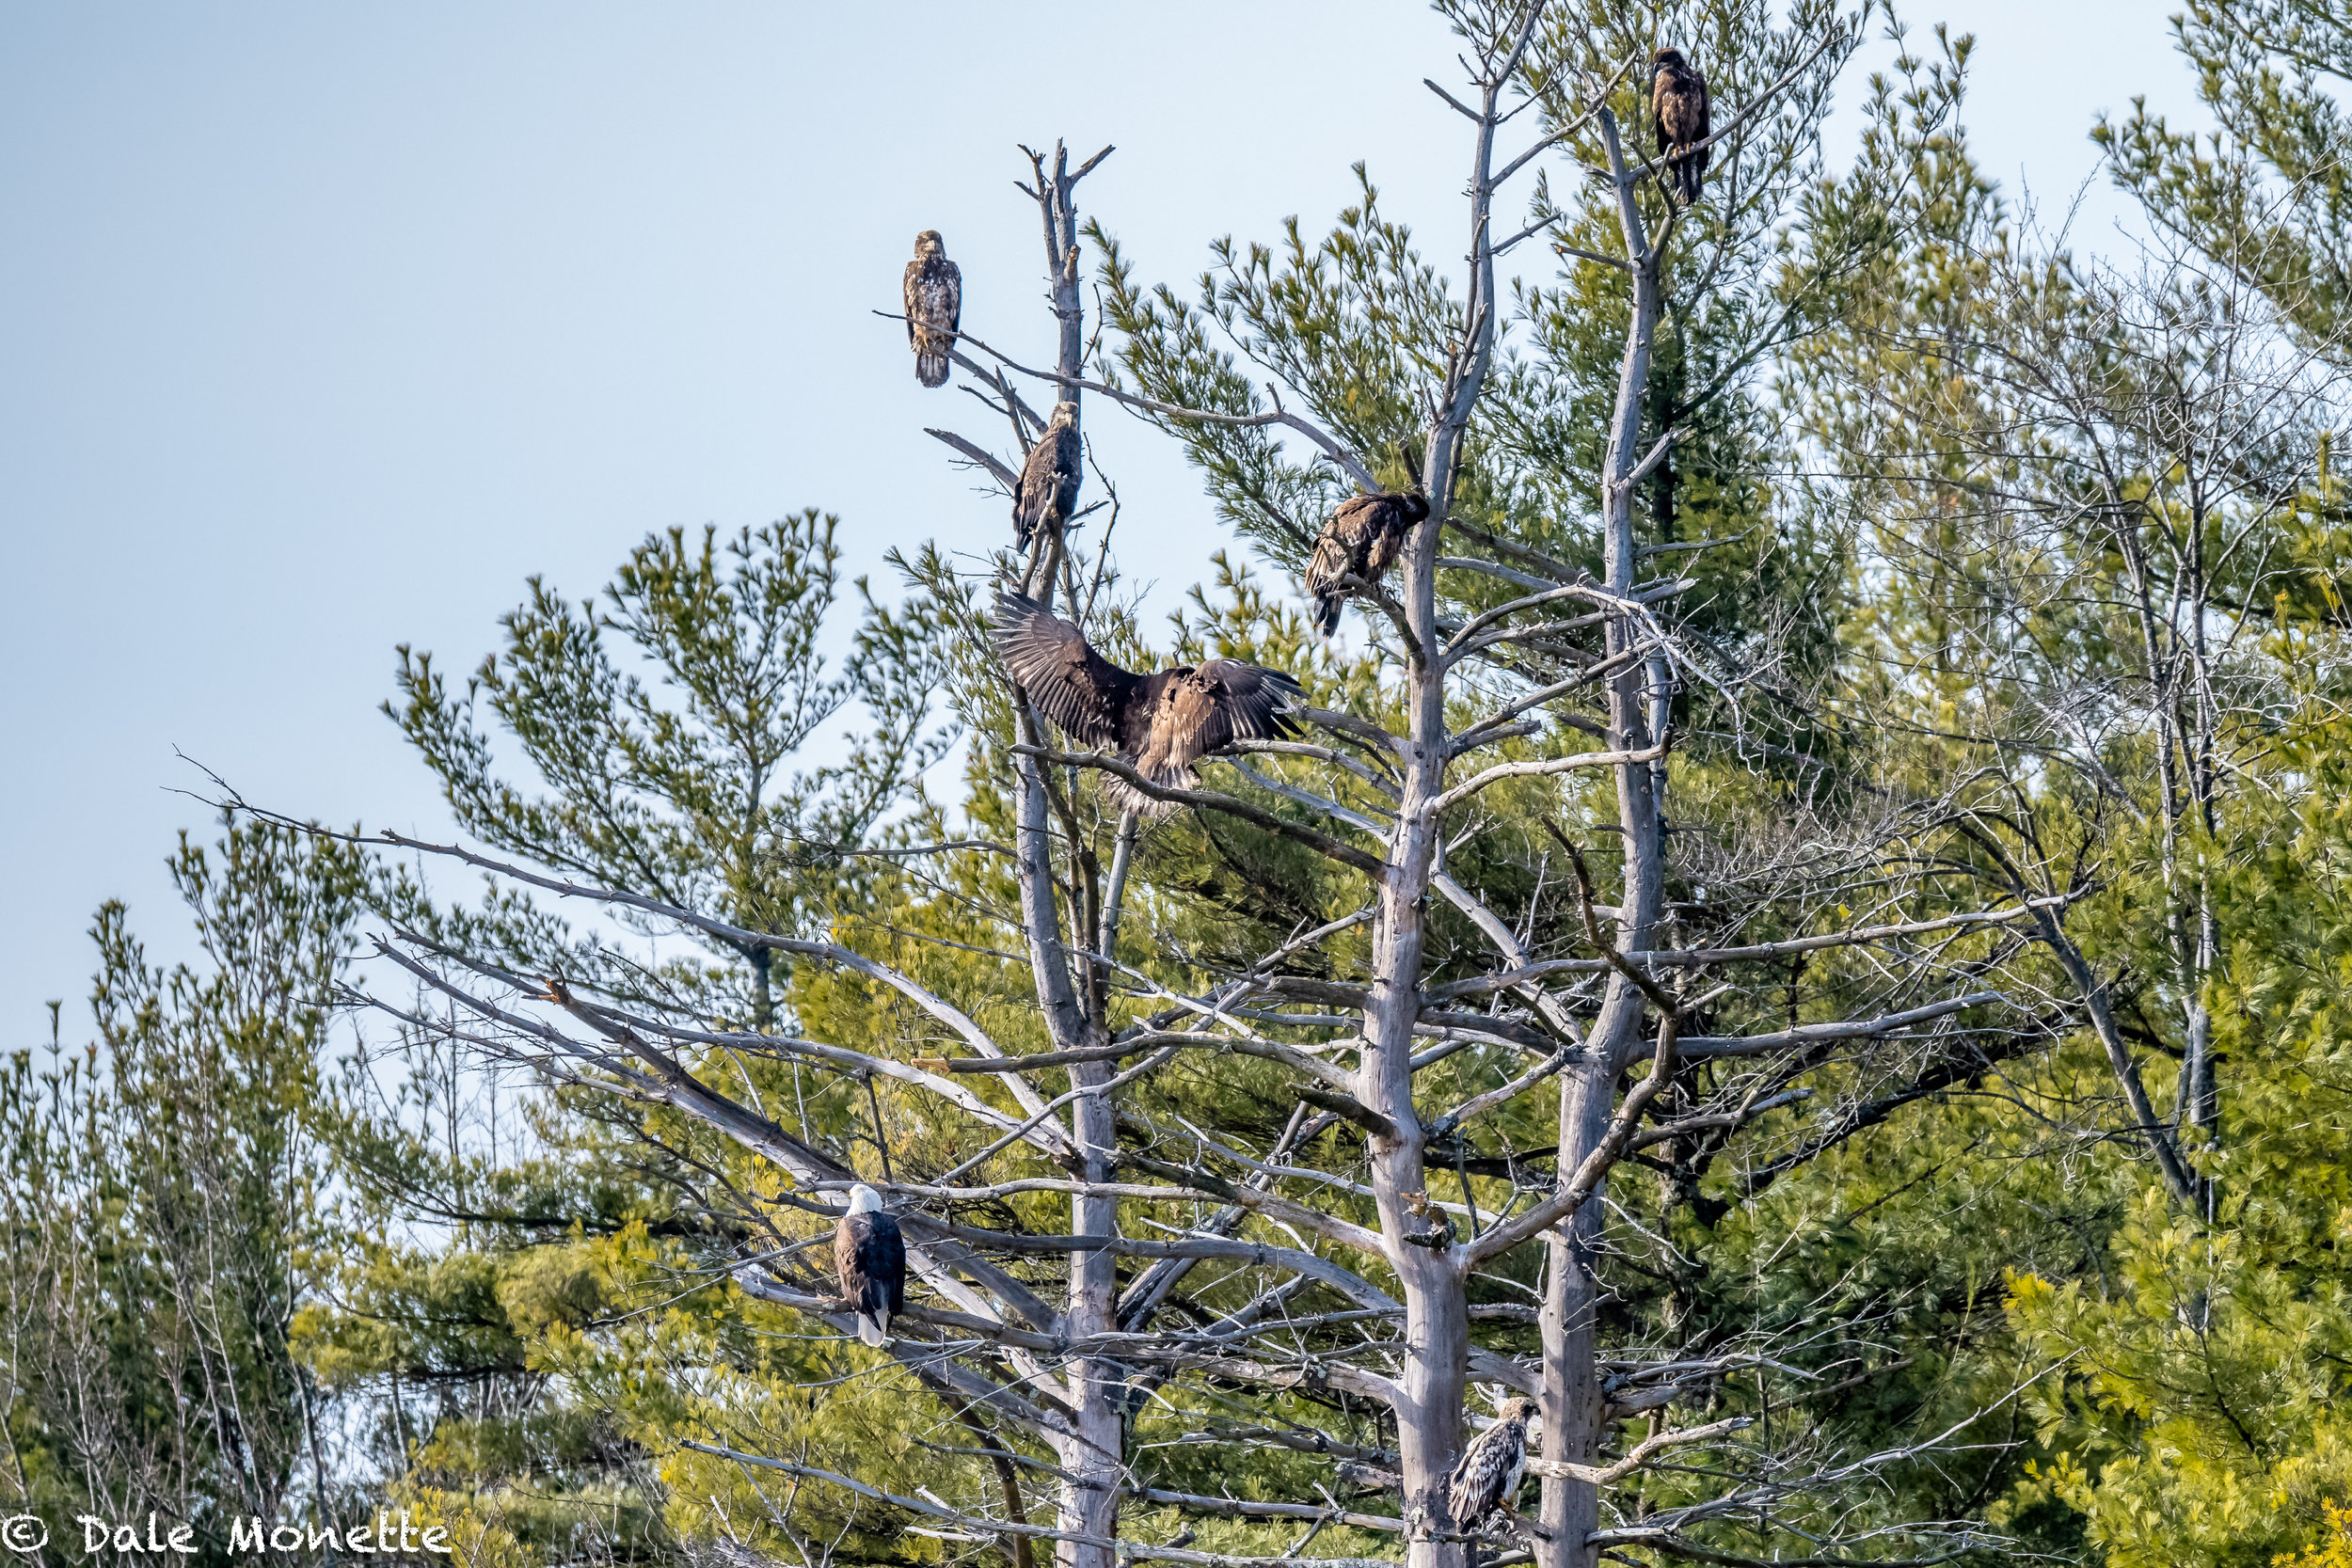   Seven bald eagles catching some afternoon rays on a cold windy day and discussing the Philadelphia Eagles and the Super Bowl.  